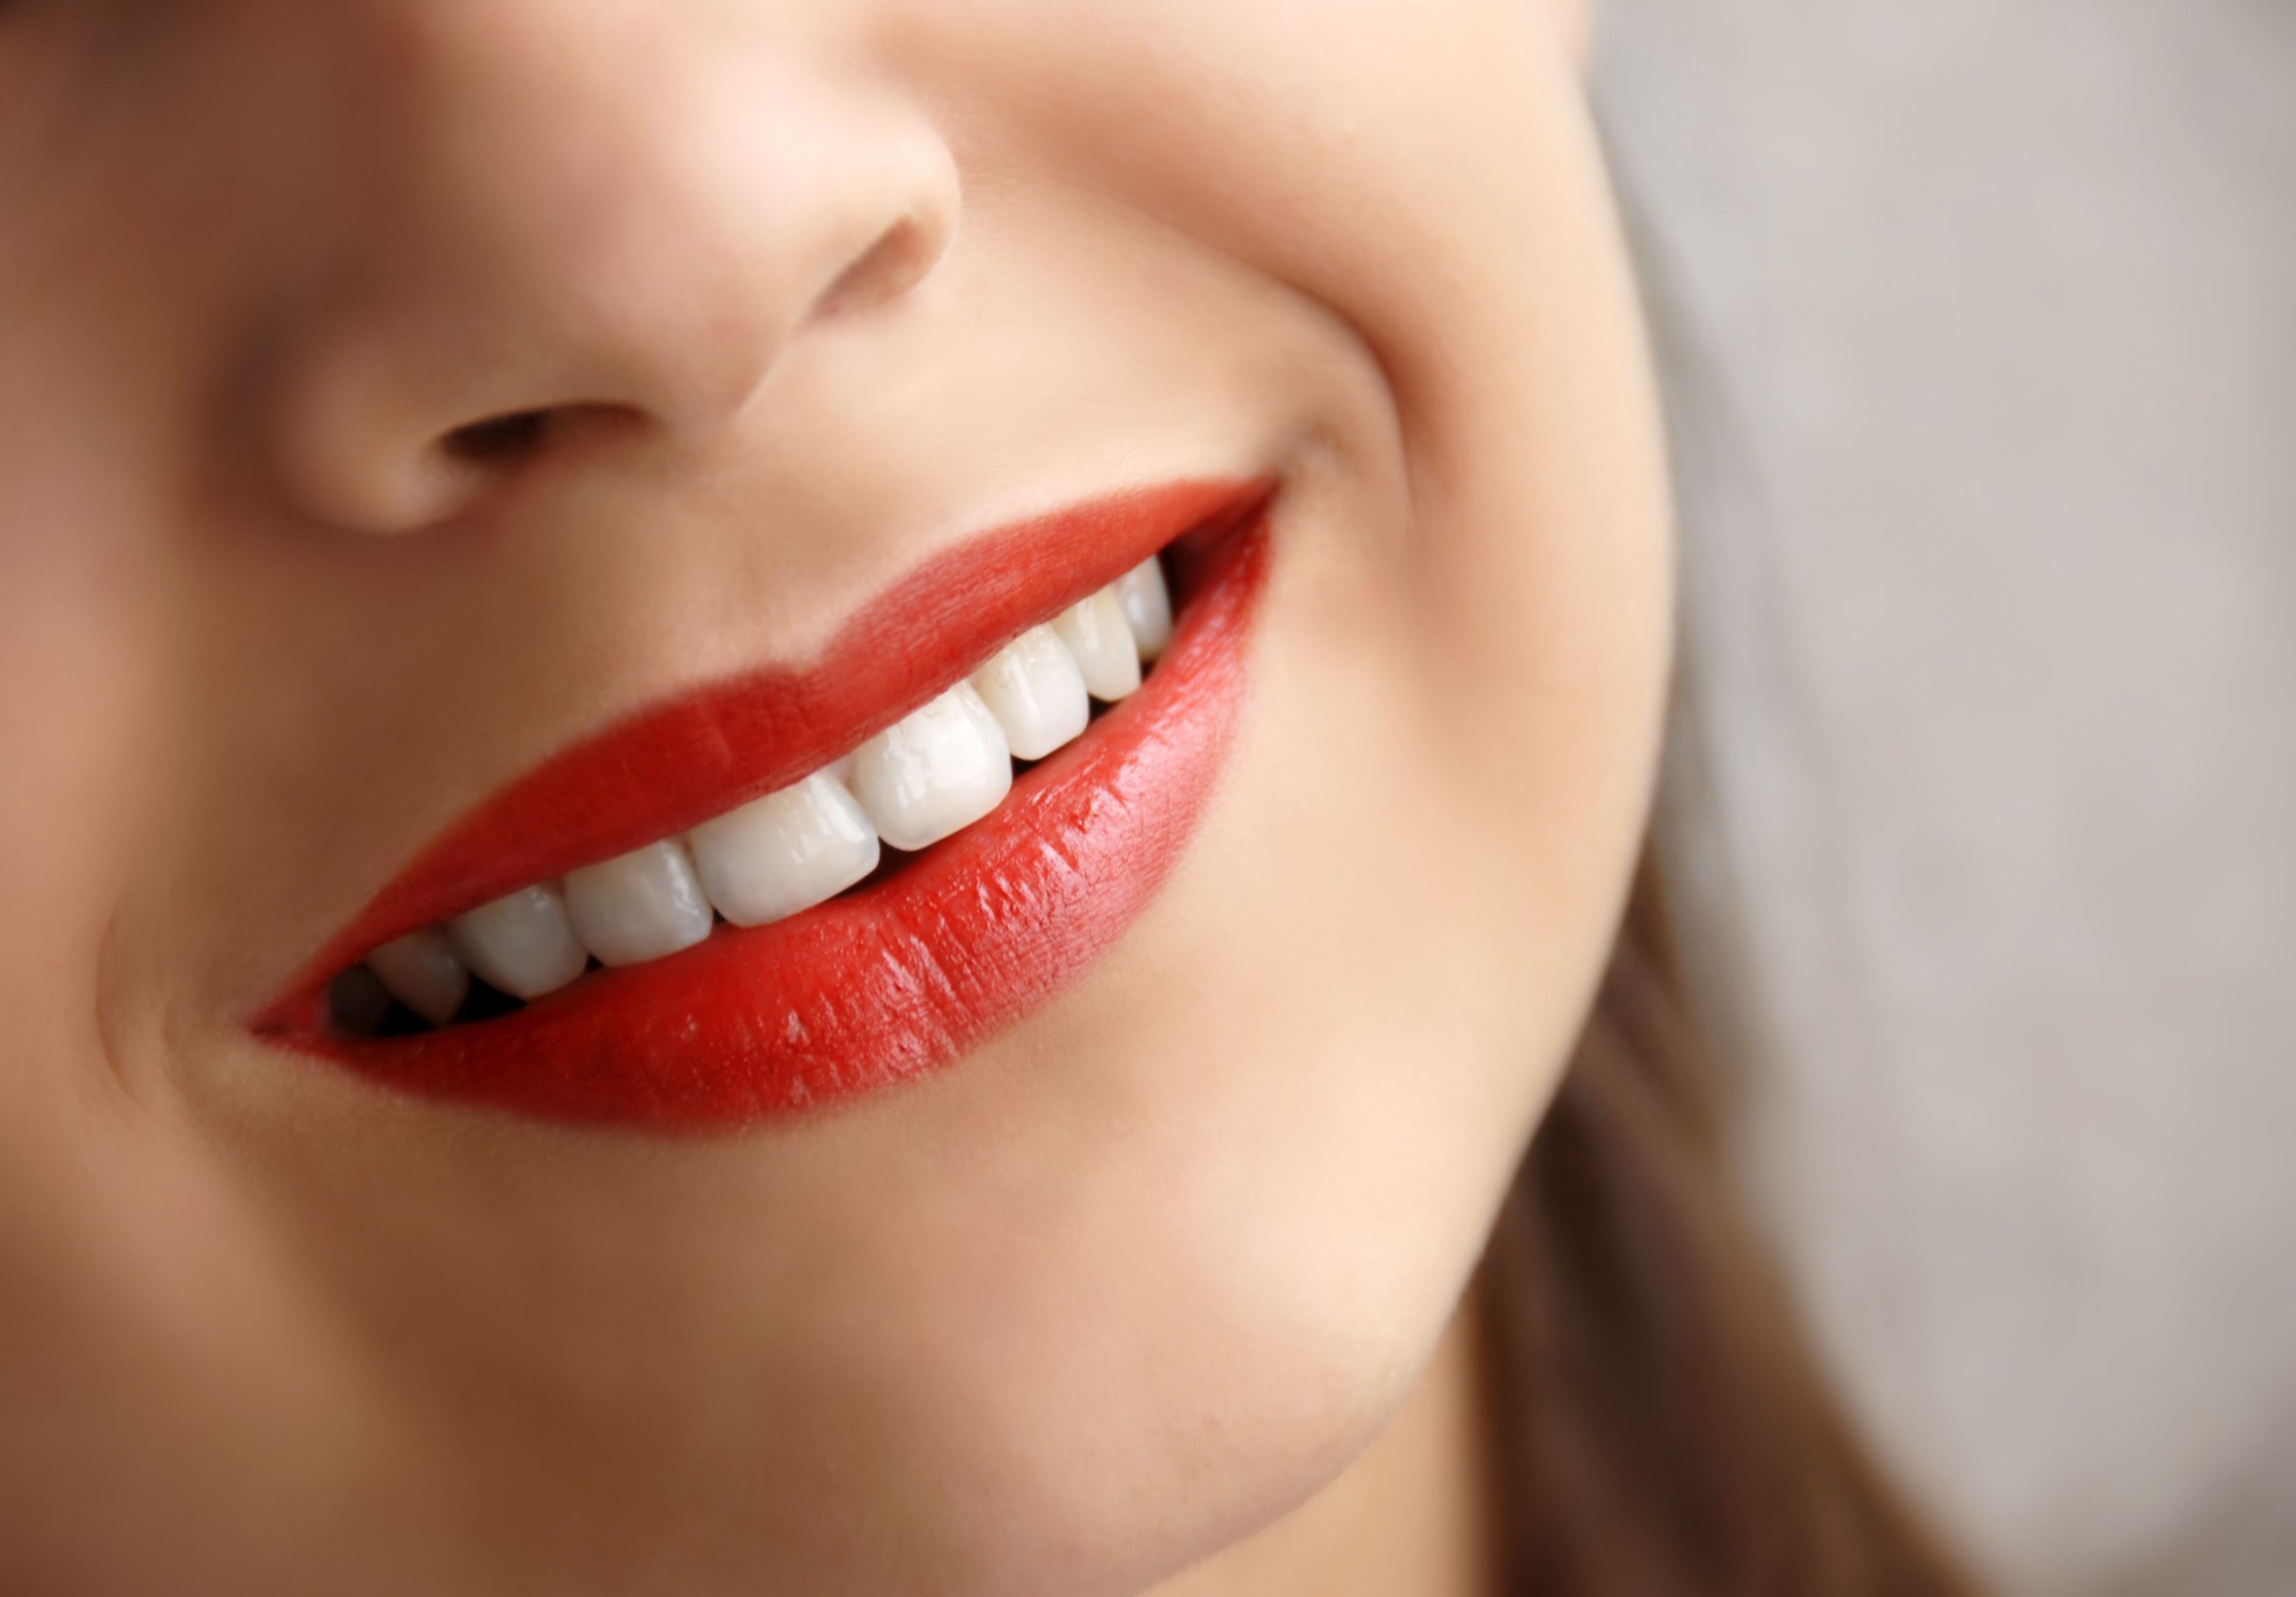 Where can I find a Cosmetic Dentist 94539?